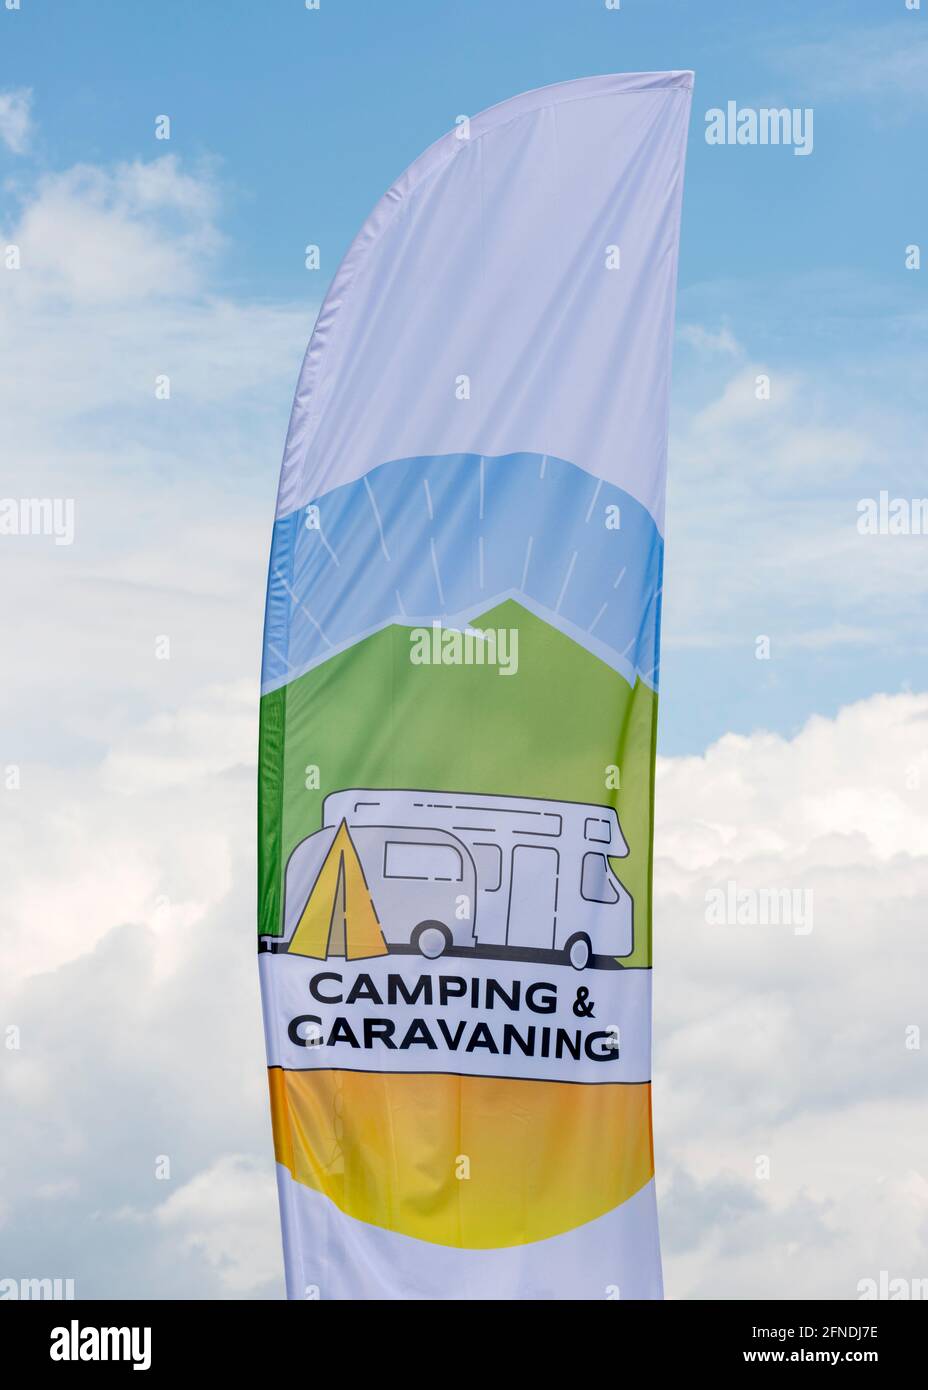 Camping and caravanning flag flying against cloudy sky Stock Photo